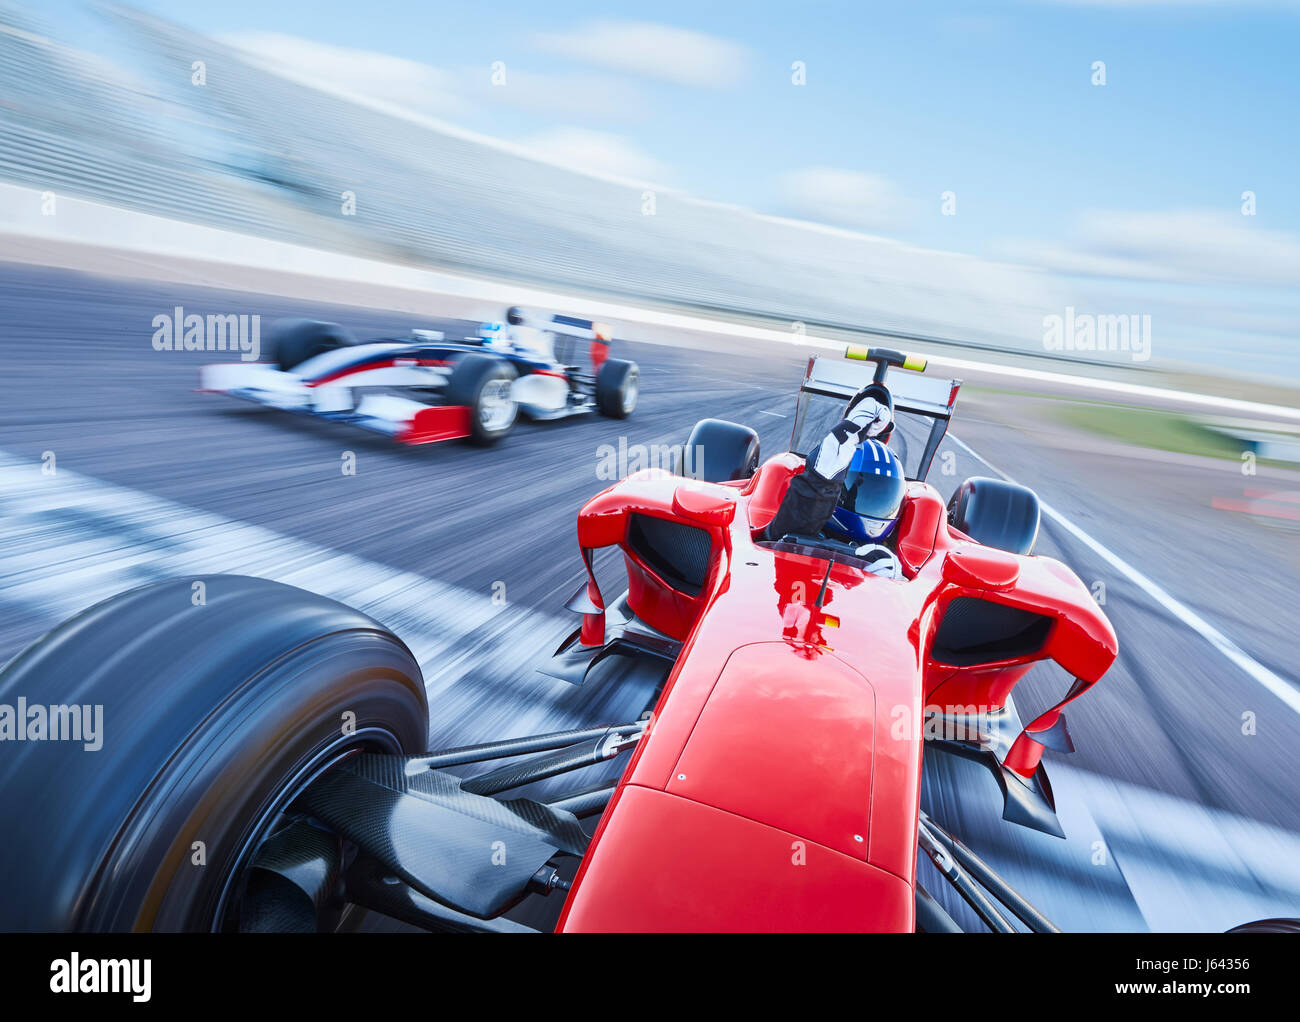 Formula one race car crossing finish line on sports track Stock Photo